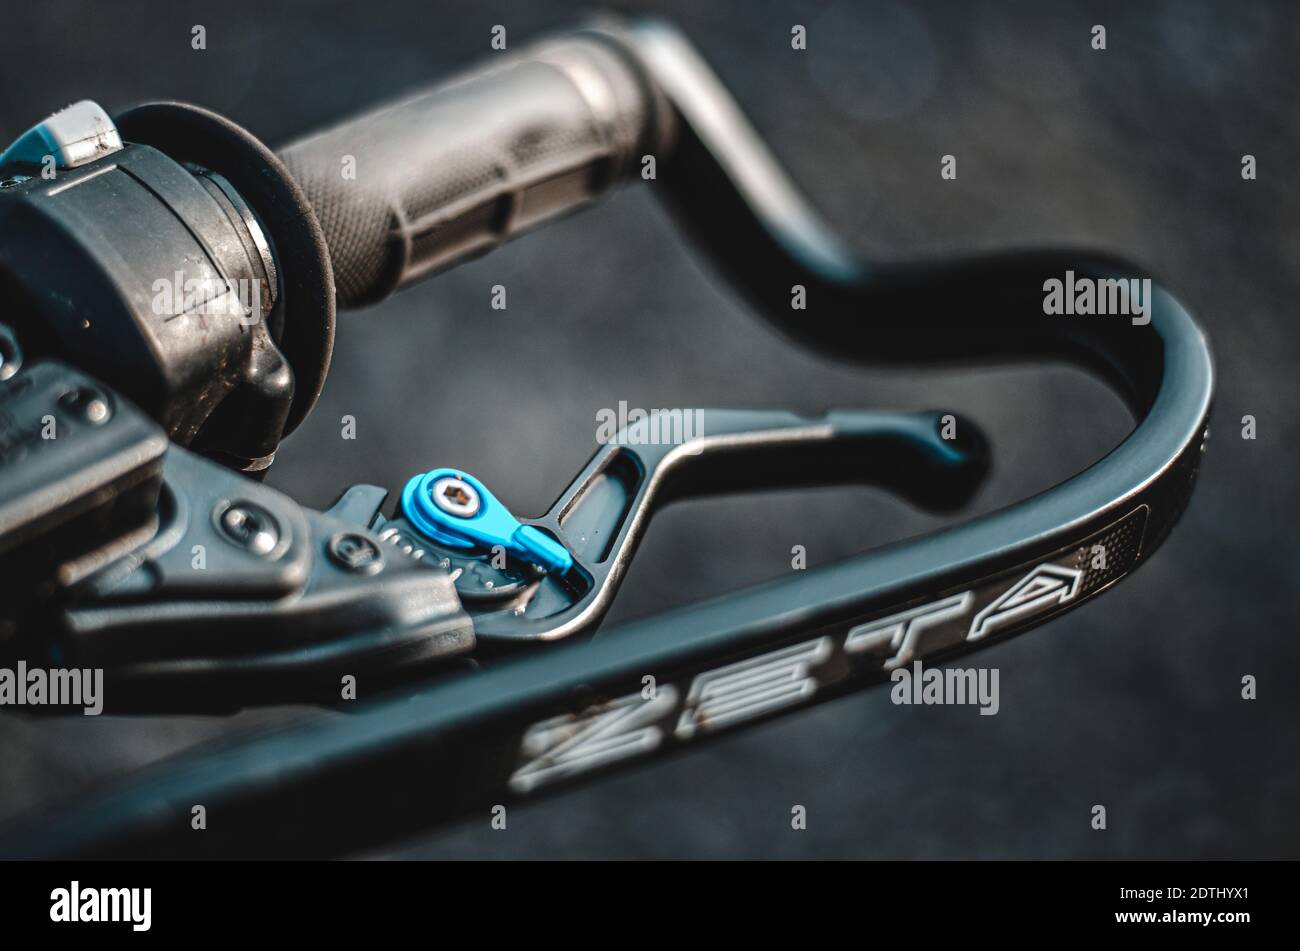 Black clutch lever from a motorcycle. Stock Photo